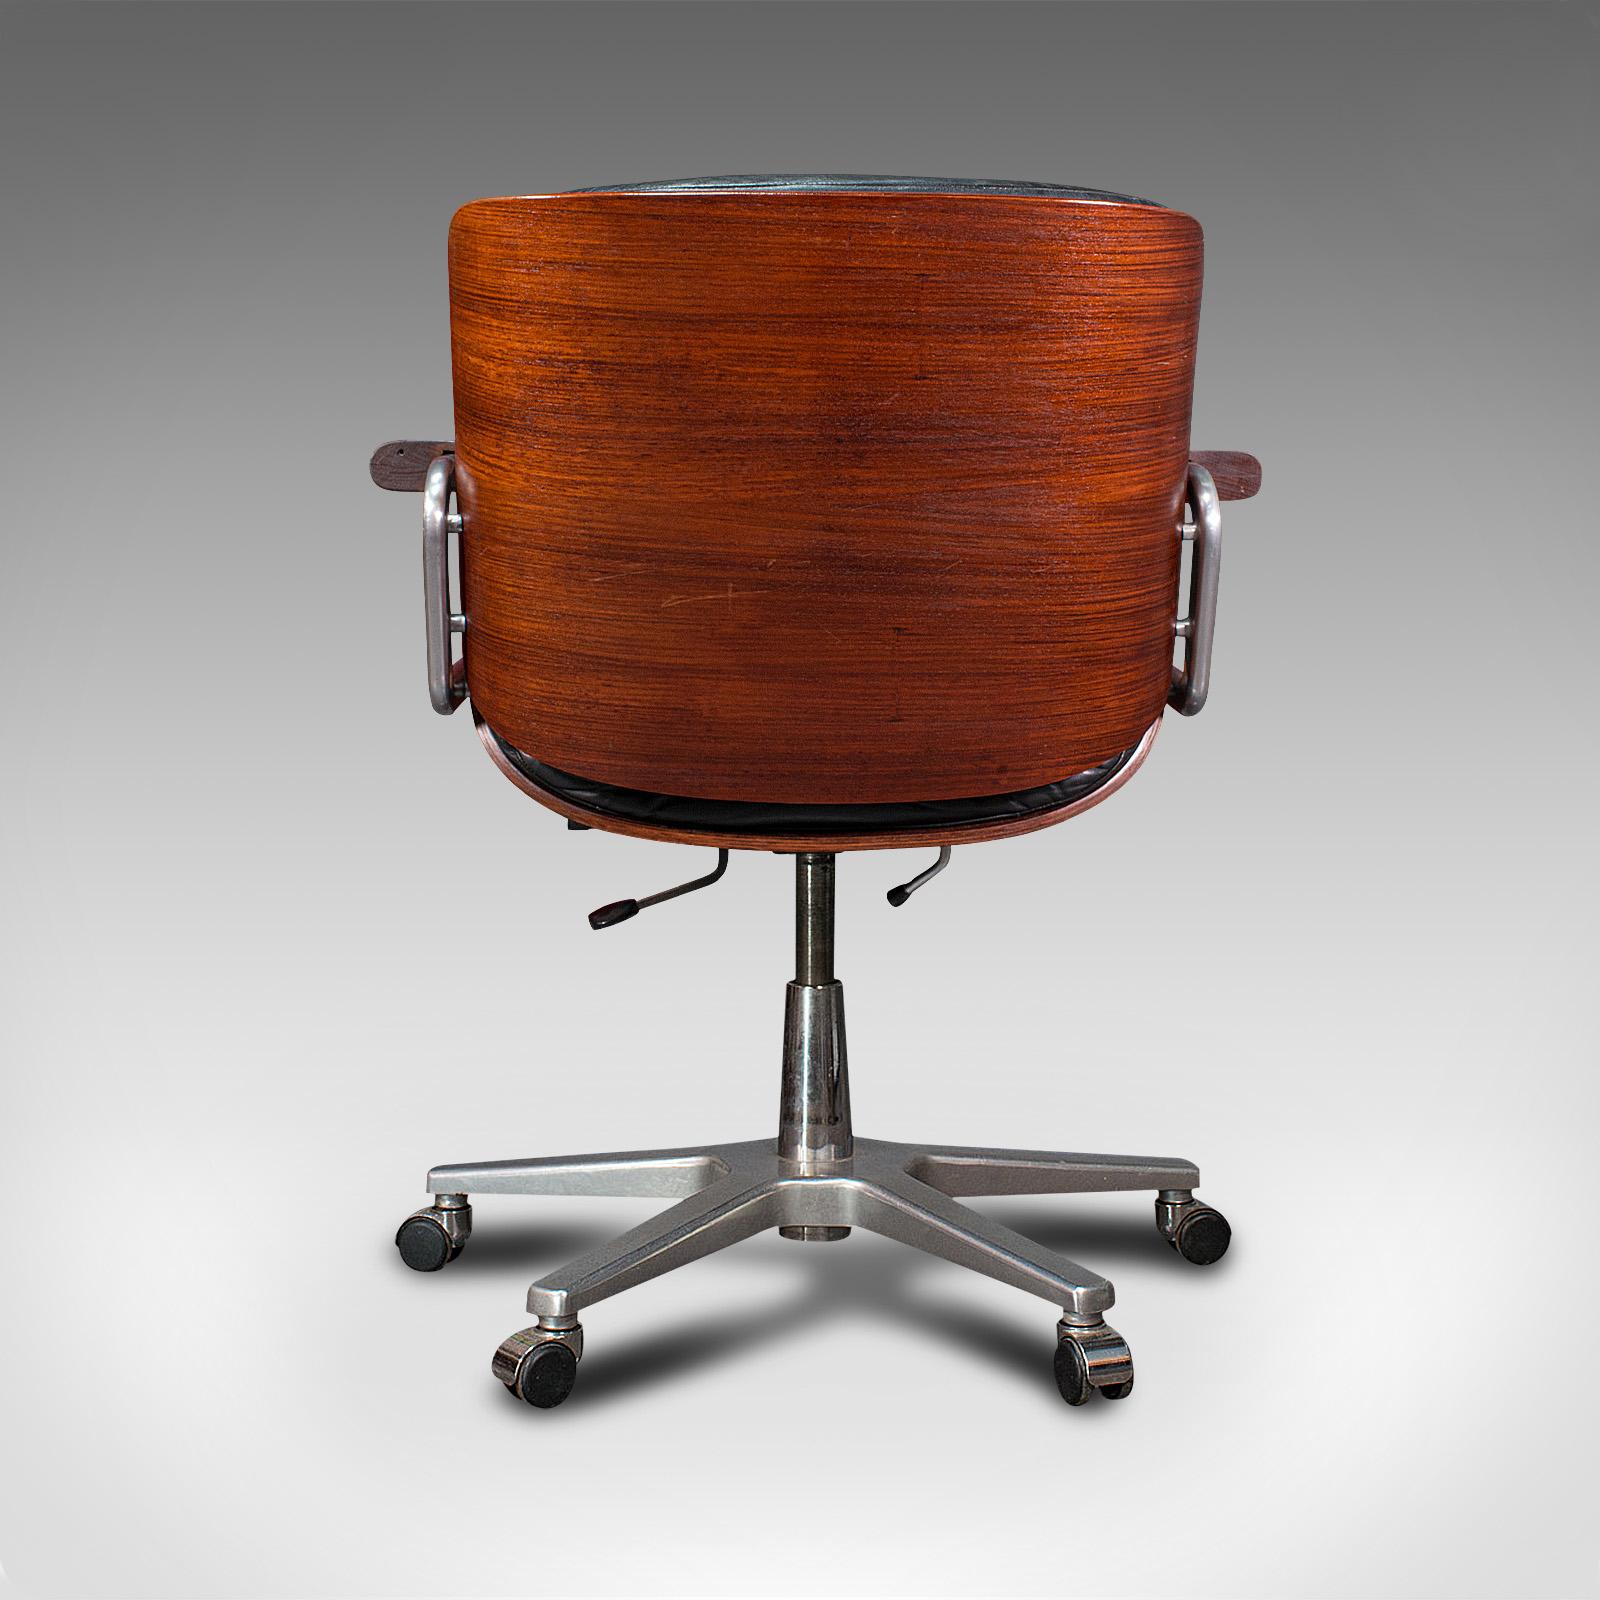 20th Century Vintage Giroflex Desk Chair, Swiss, Rosewood, Leather, Office Seat, Martin Stoll